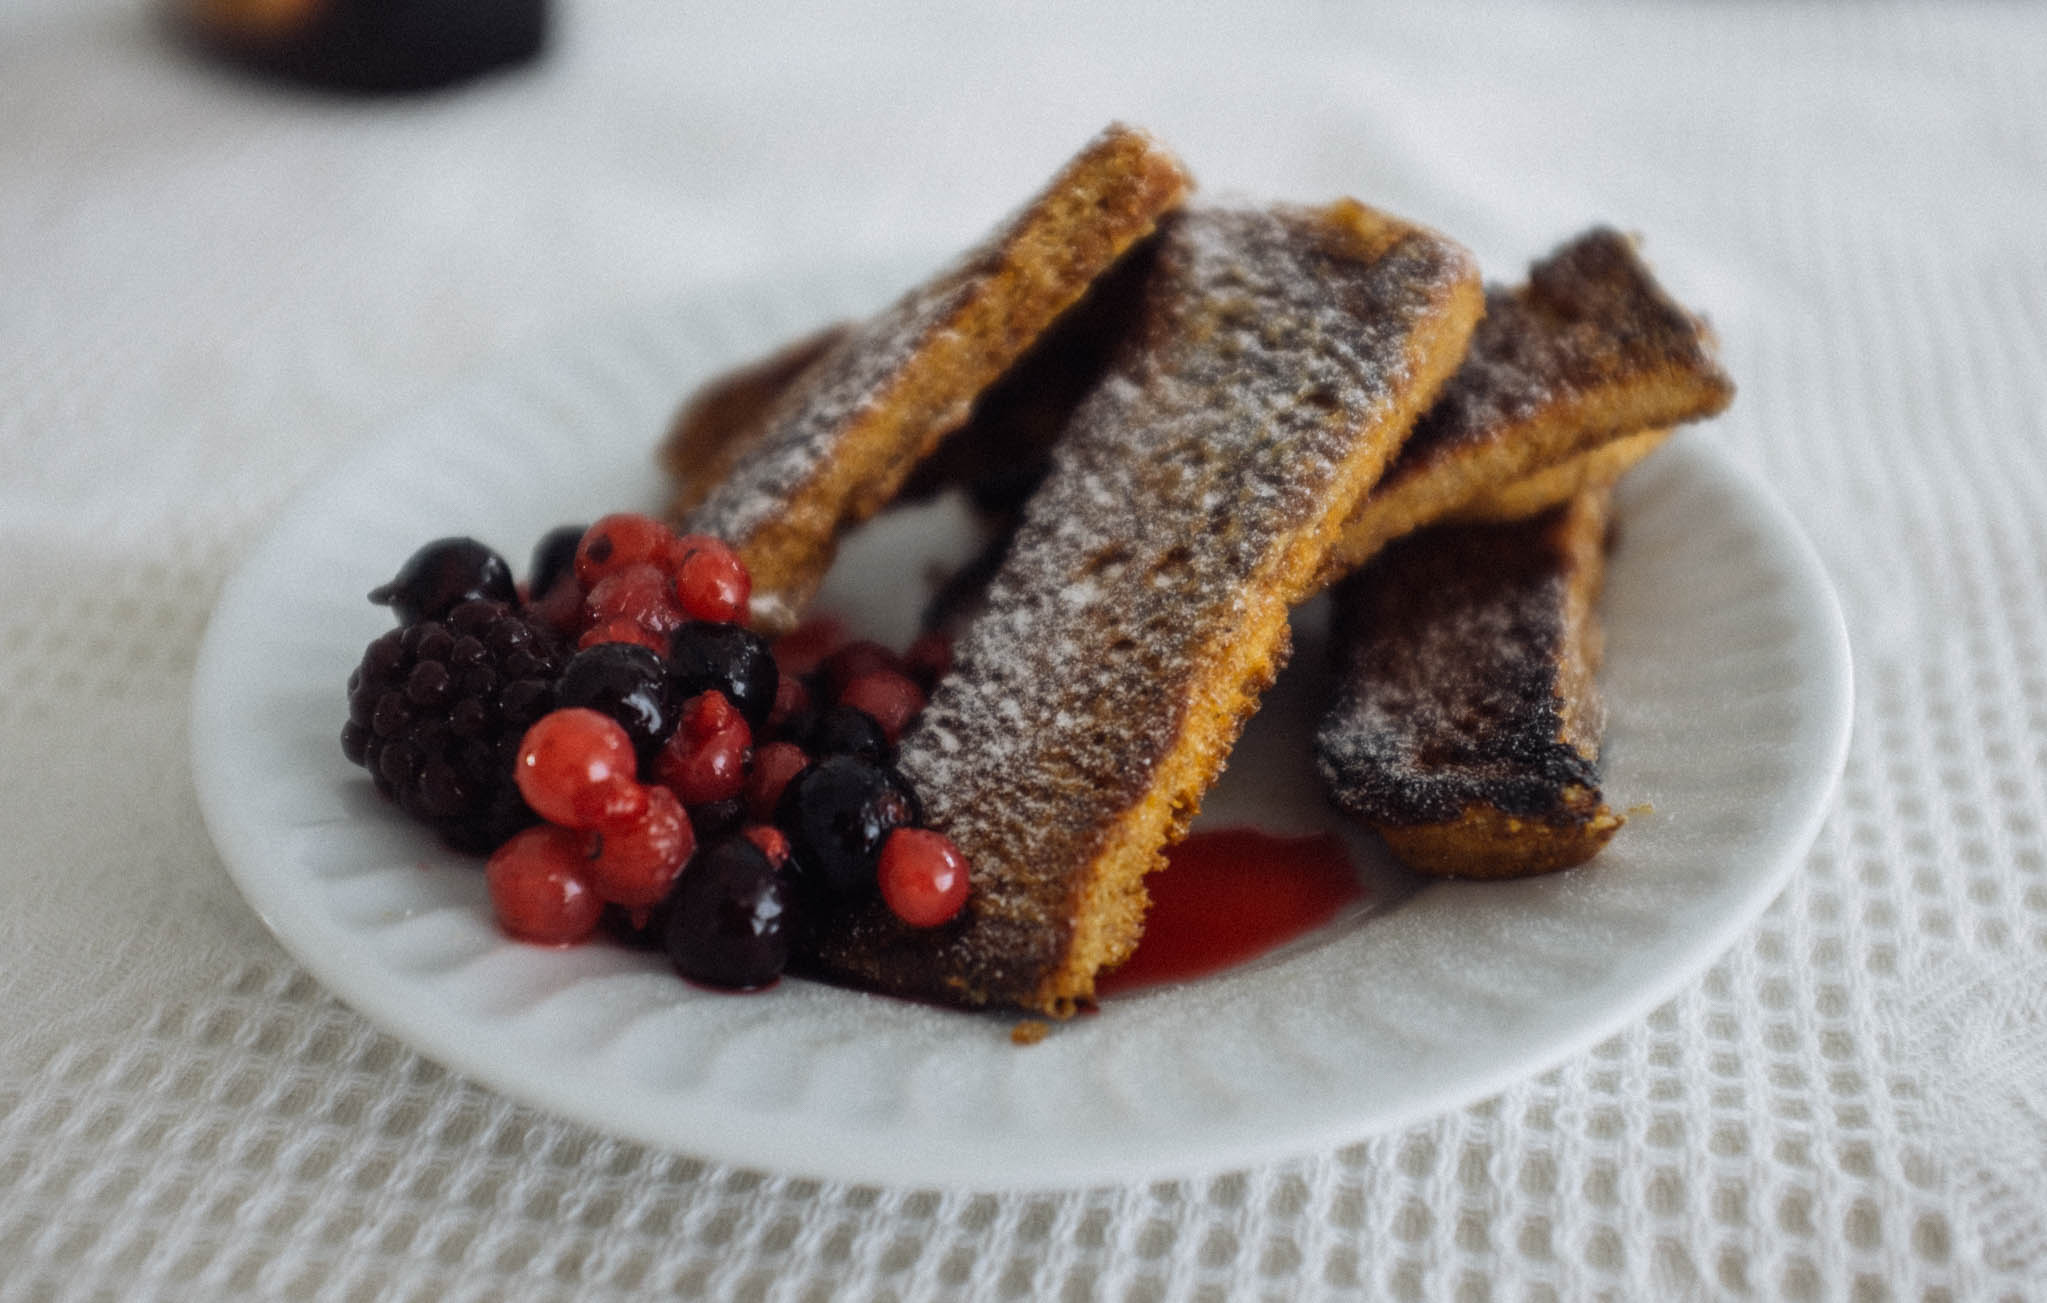 French toast and red berries.